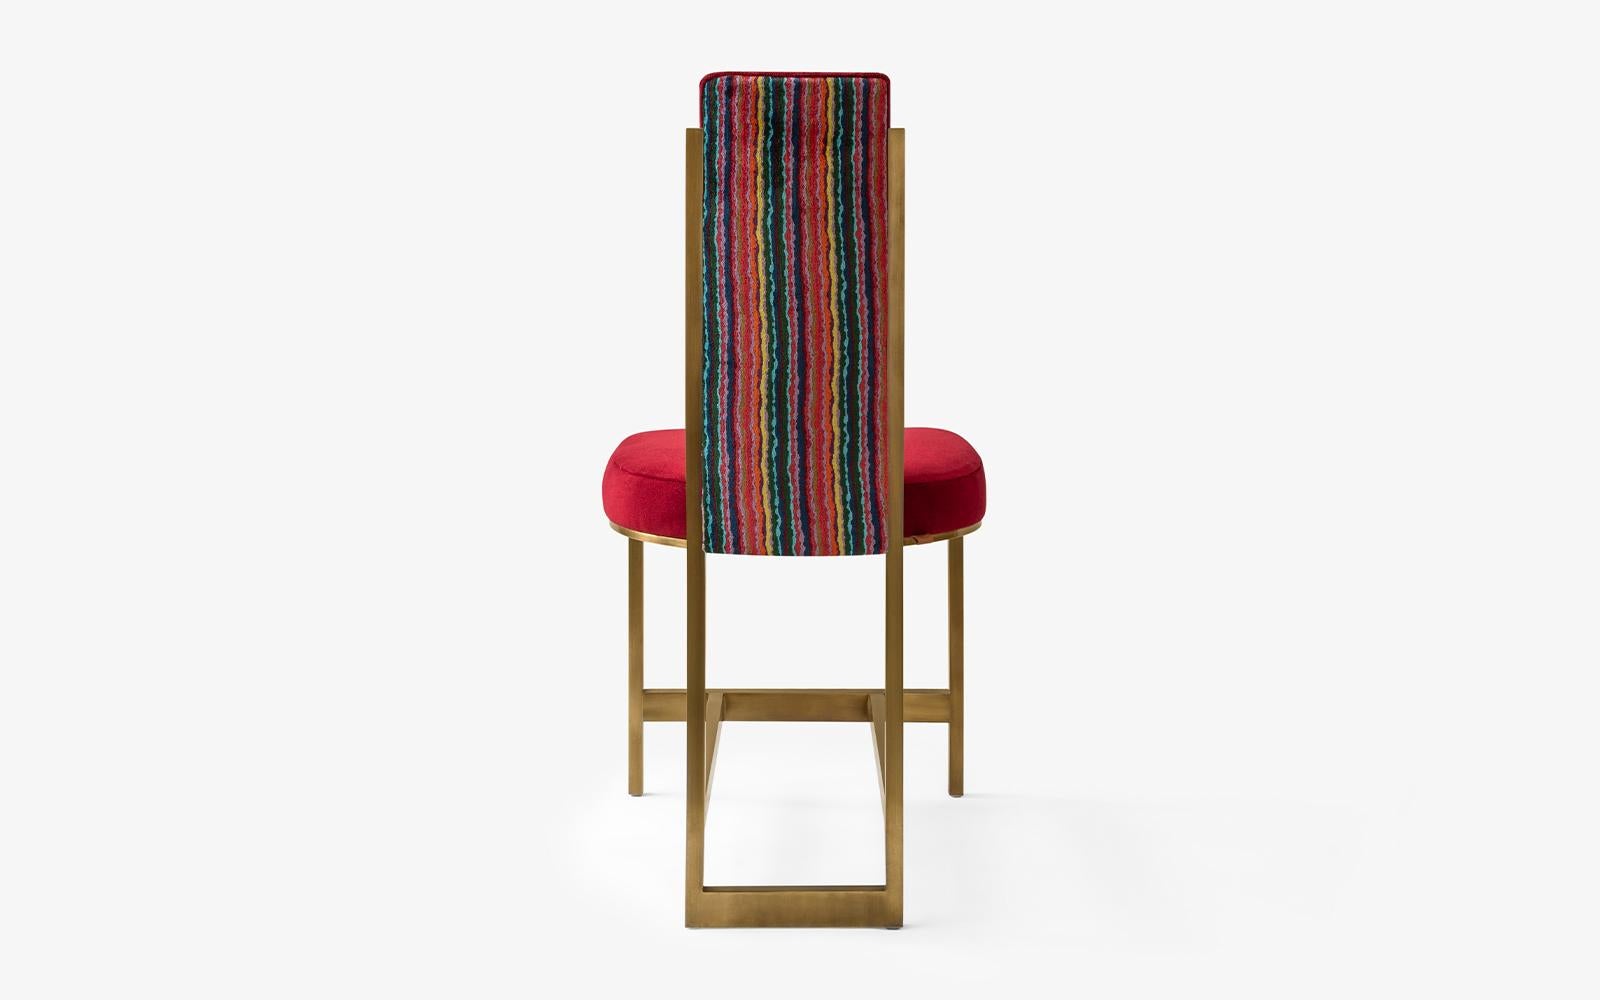 The recalled red chair brings out your resonance for antiquity with its fine workmanship and aesthetic form combined with practical comfort.

Measures: Length: 17.7'' / Depth: 20.9'' / Height: 36.2'' / Seat Height: 17.7''
Weight: 9.9